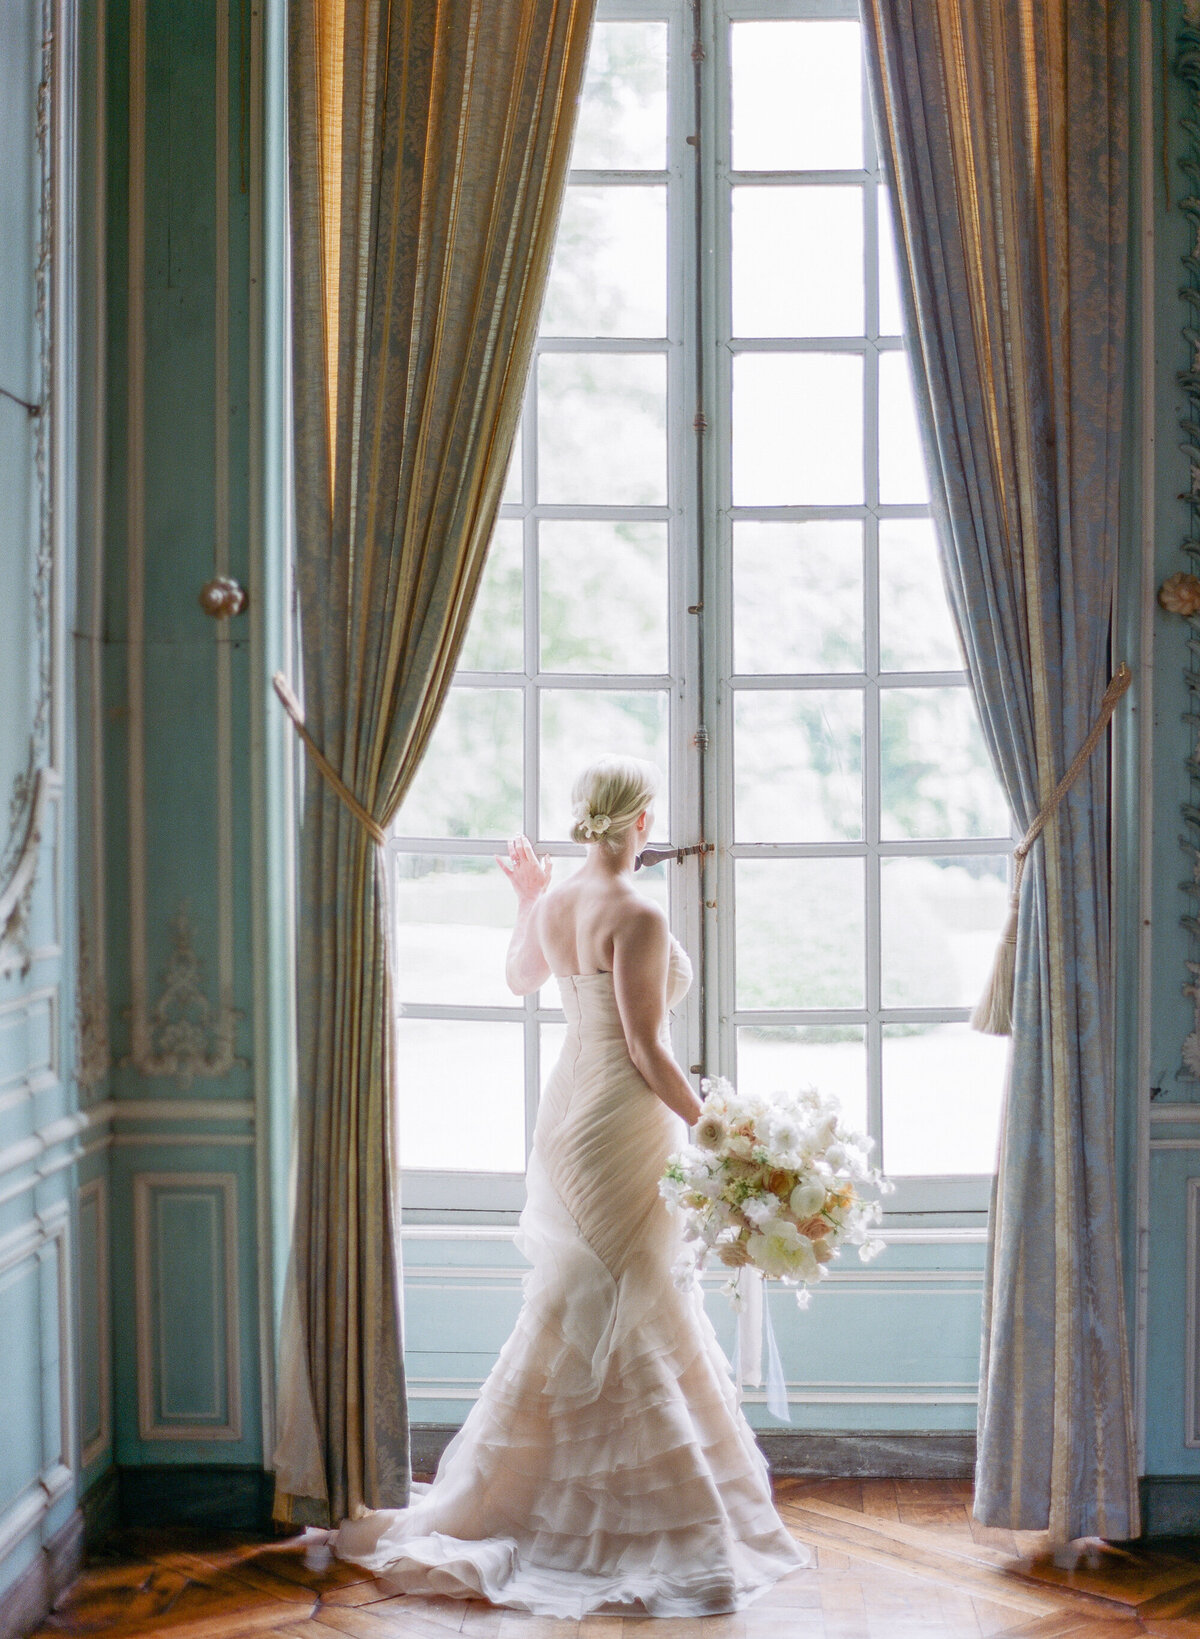 Jennifer Fox Weddings English speaking wedding planning & design agency in France crafting refined and bespoke weddings and celebrations Provence, Paris and destination Laurel-Chris-Chateau-de-Champlatreaux-Molly-Carr-Photography-42